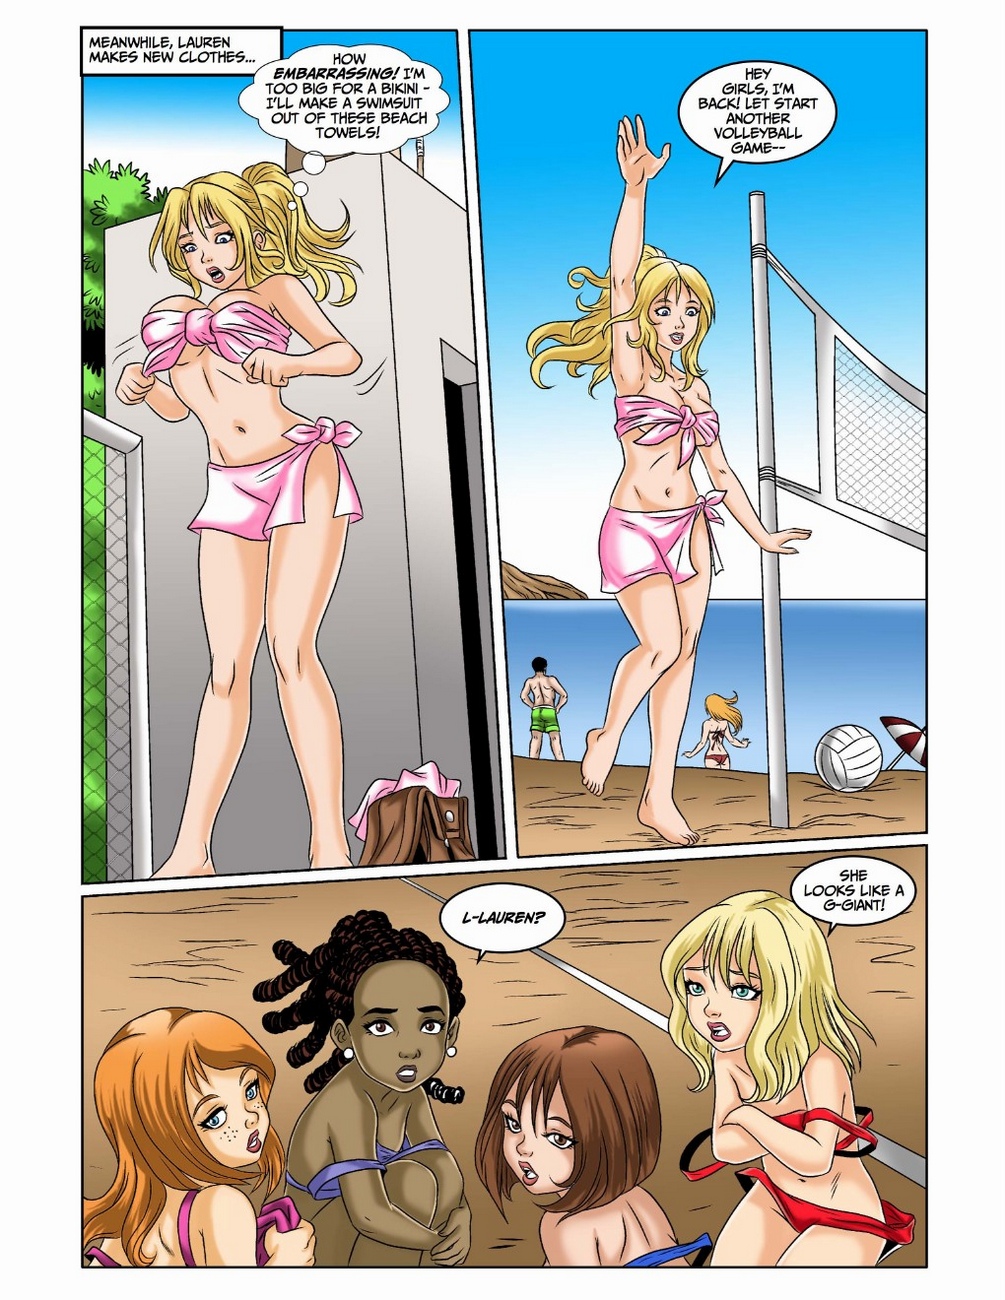 The Puberty Fairies 2